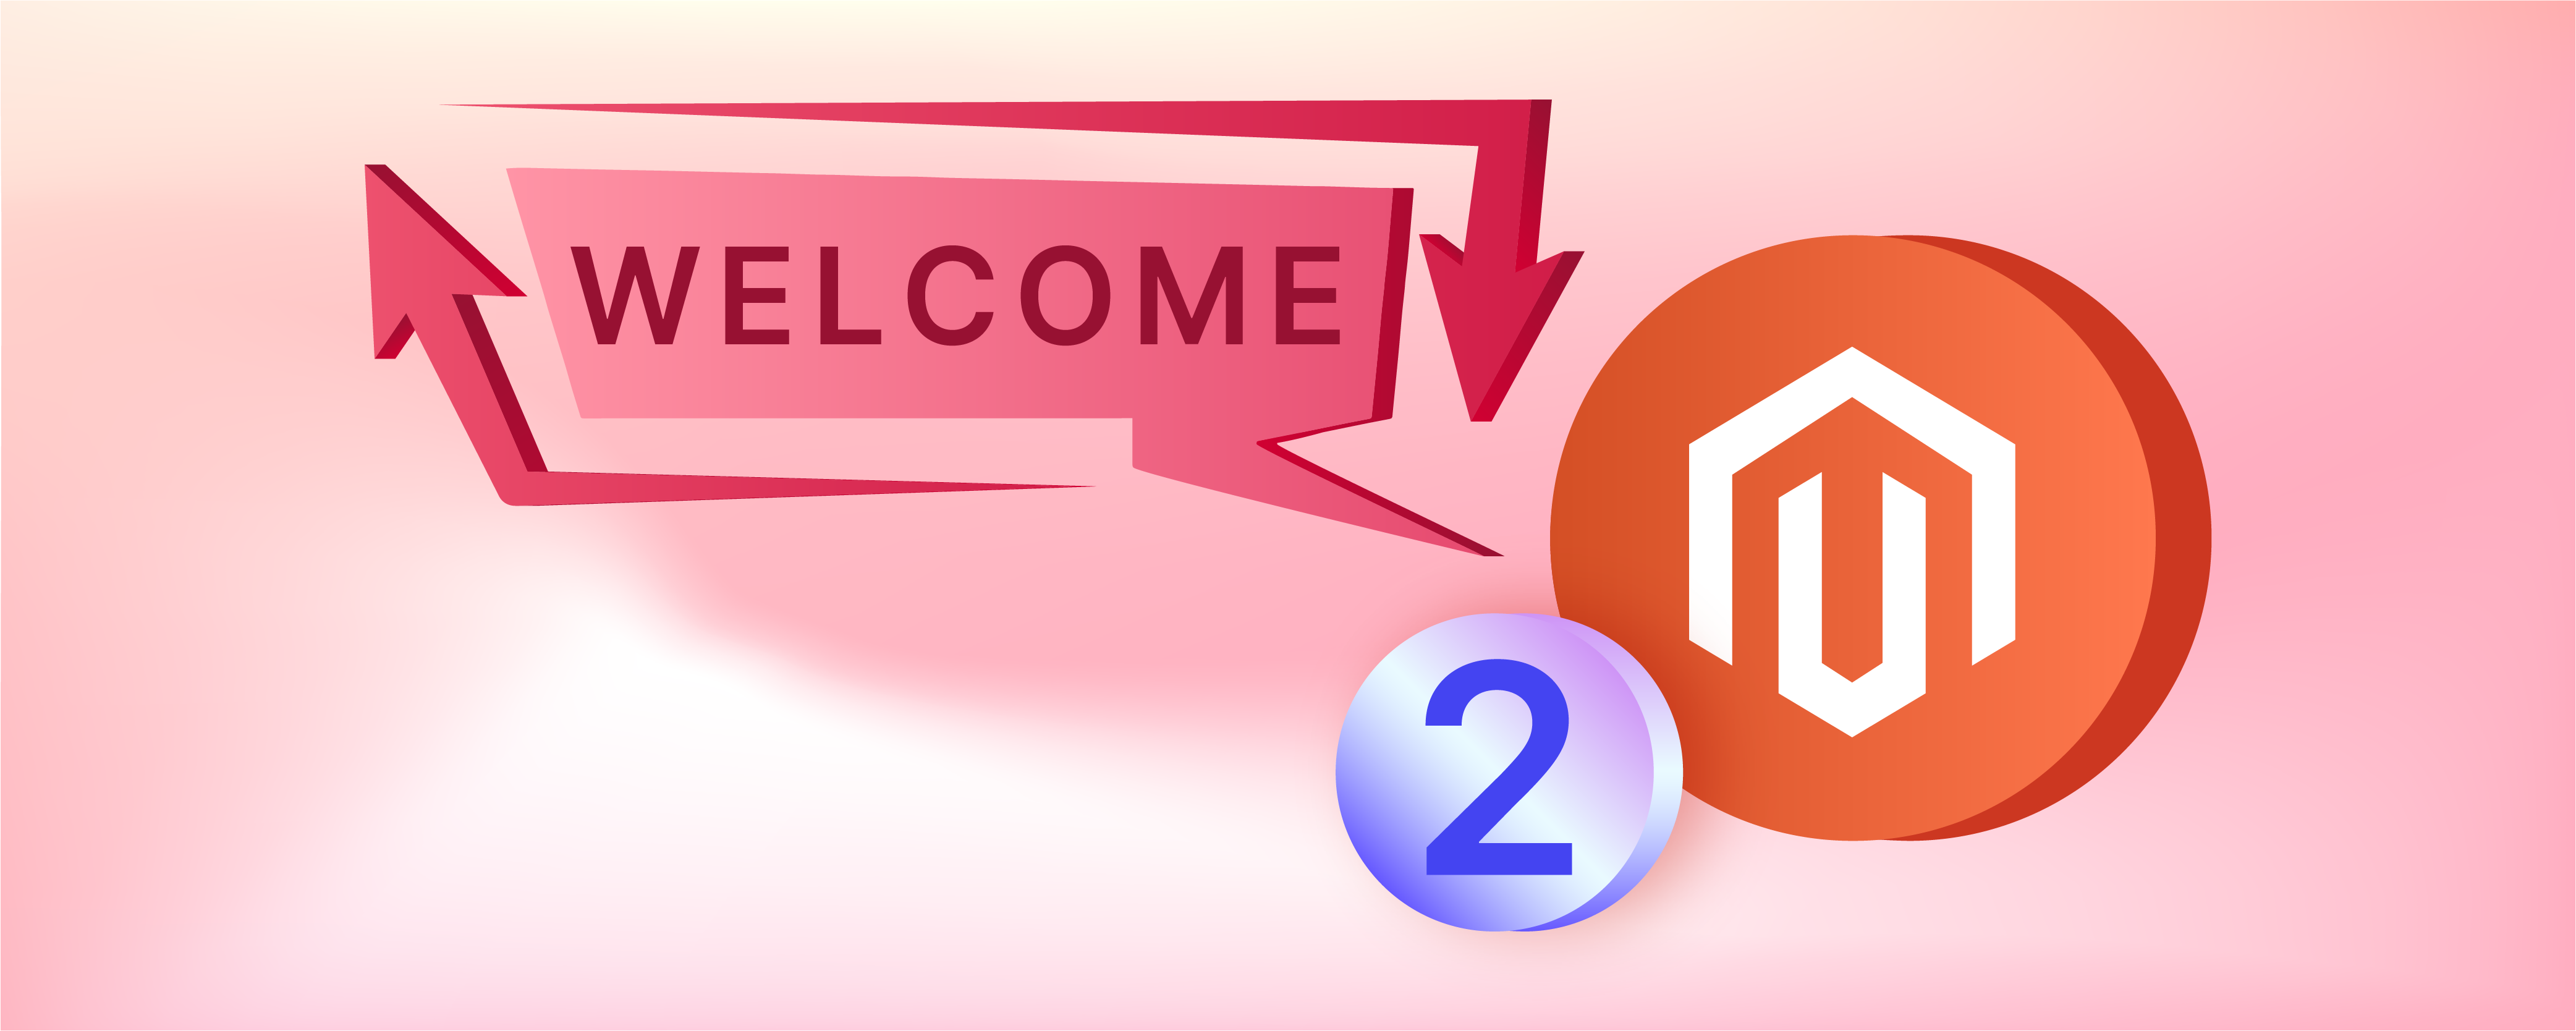 5 Steps to Change Welcome Message in Magento 2